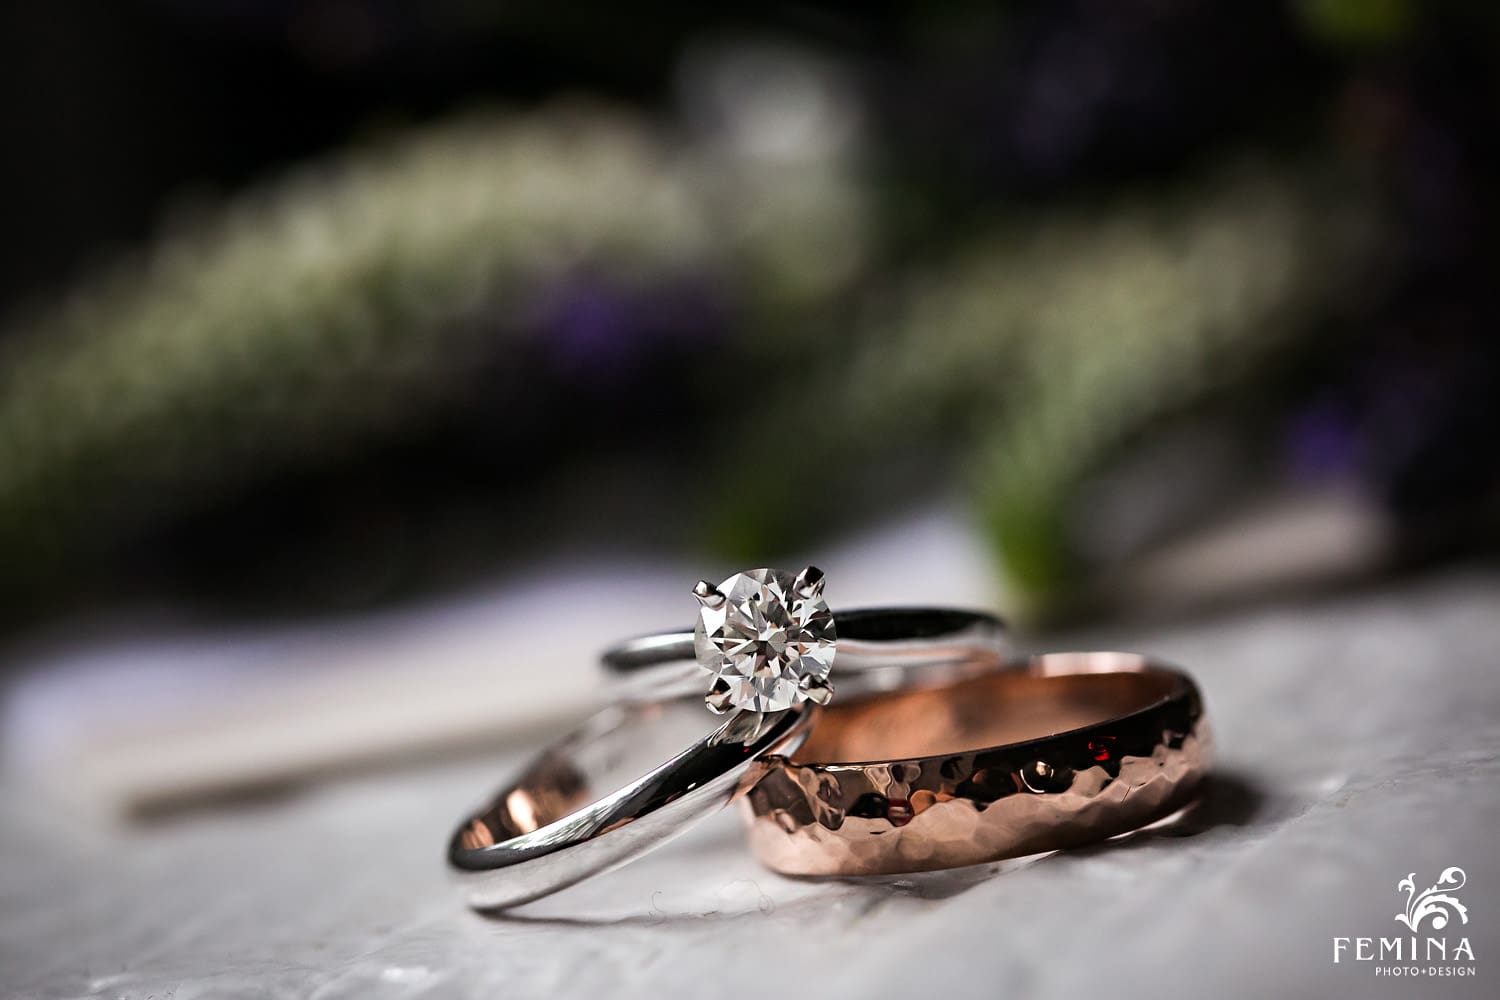 Marijela and Steven's wedding and engagement rings